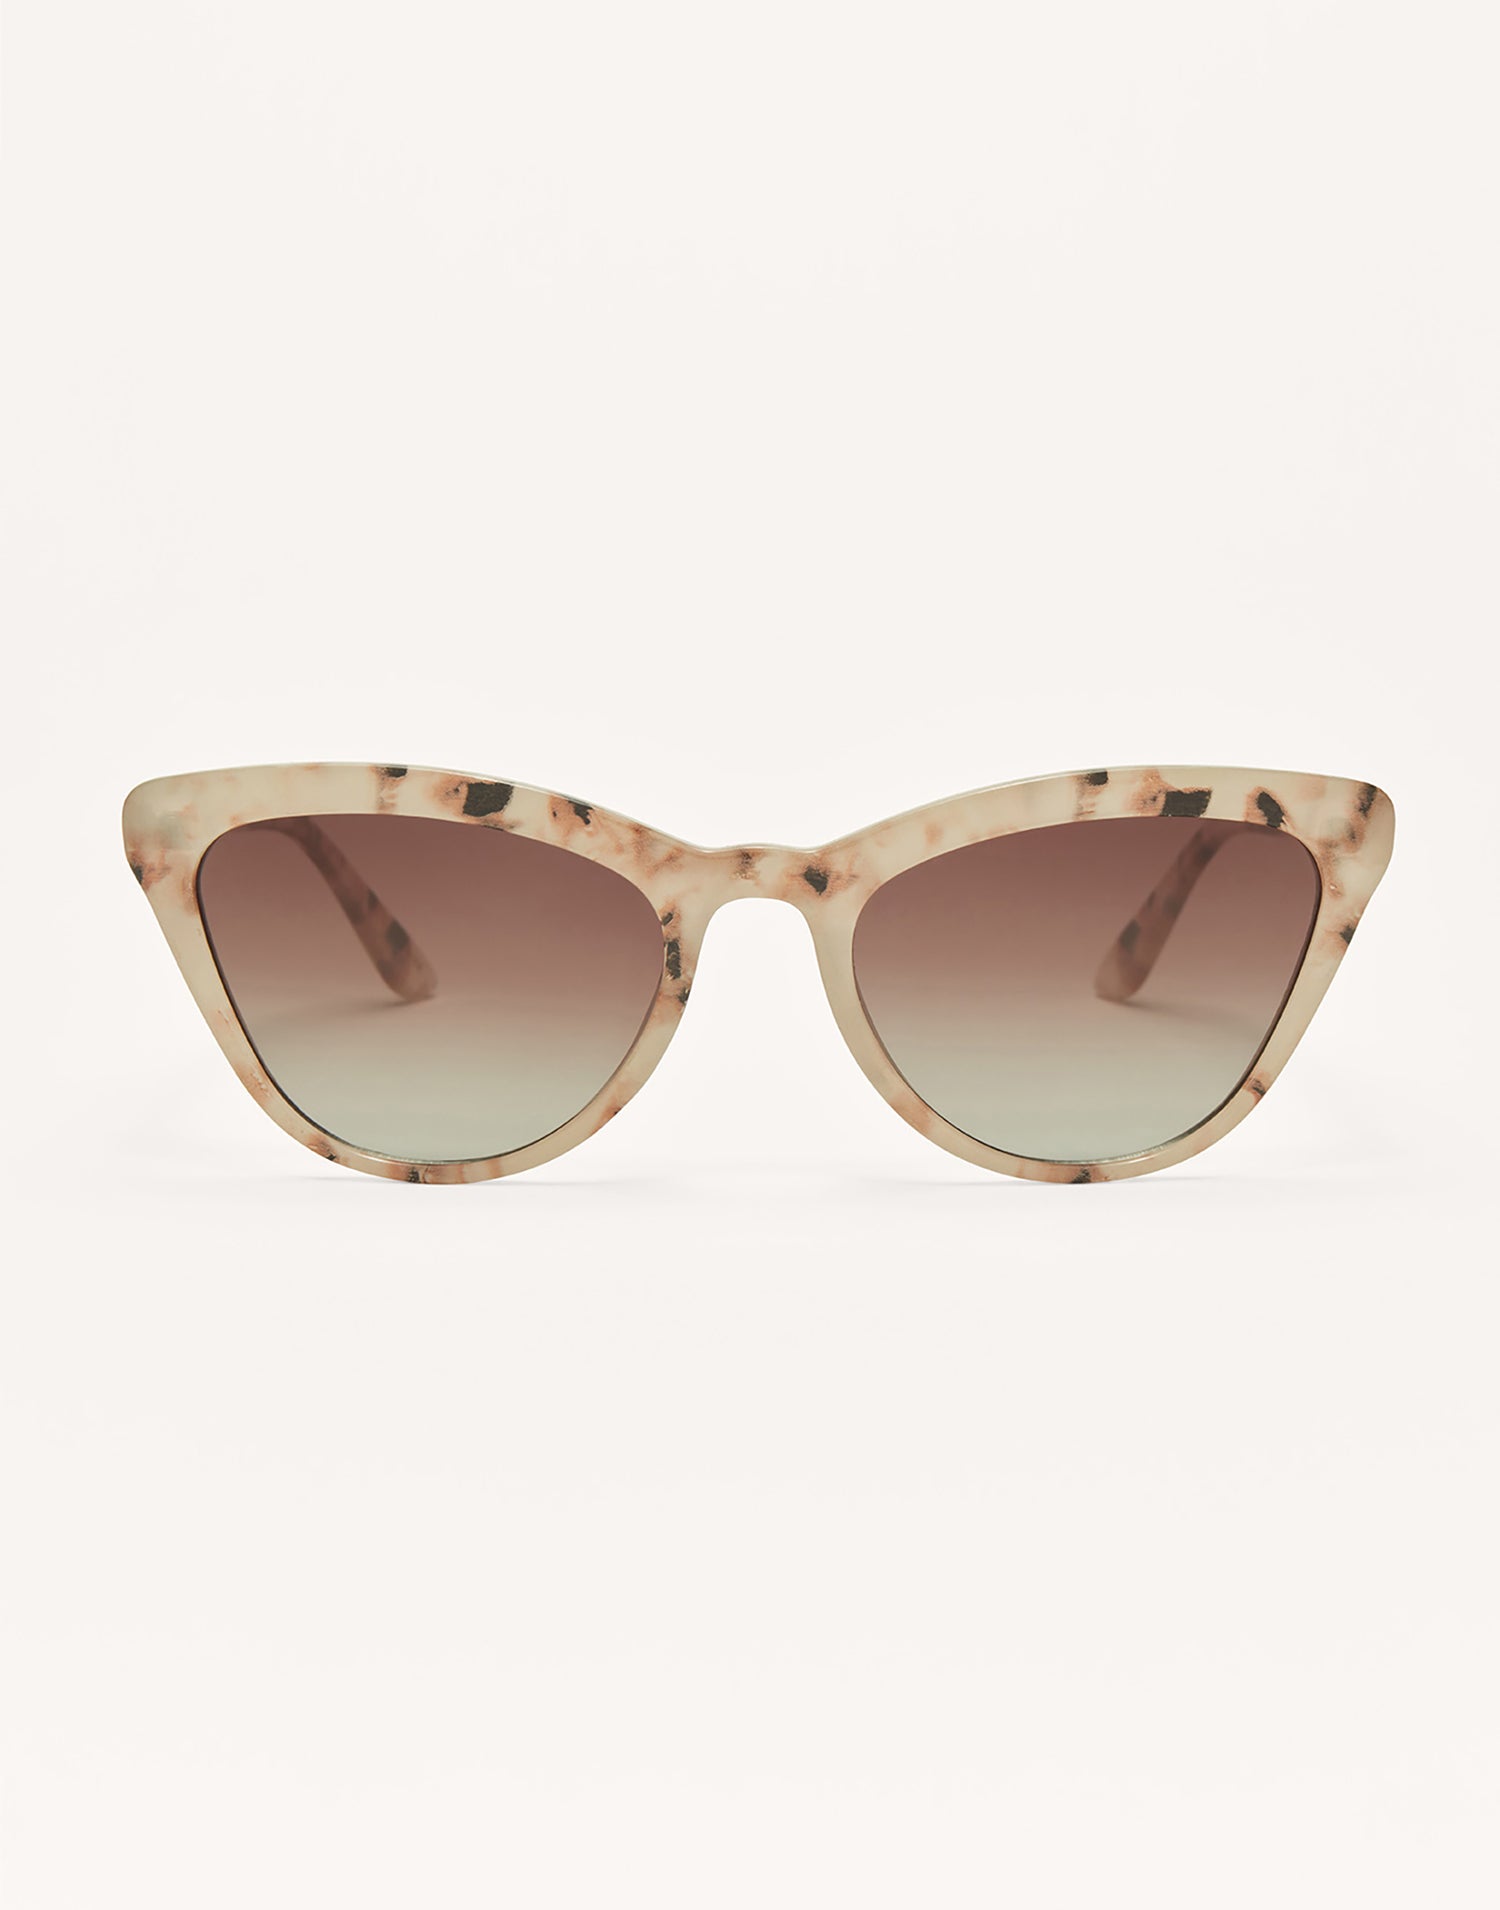 Rooftop Sunglasses by Z Supply in Warm Sands - Front View